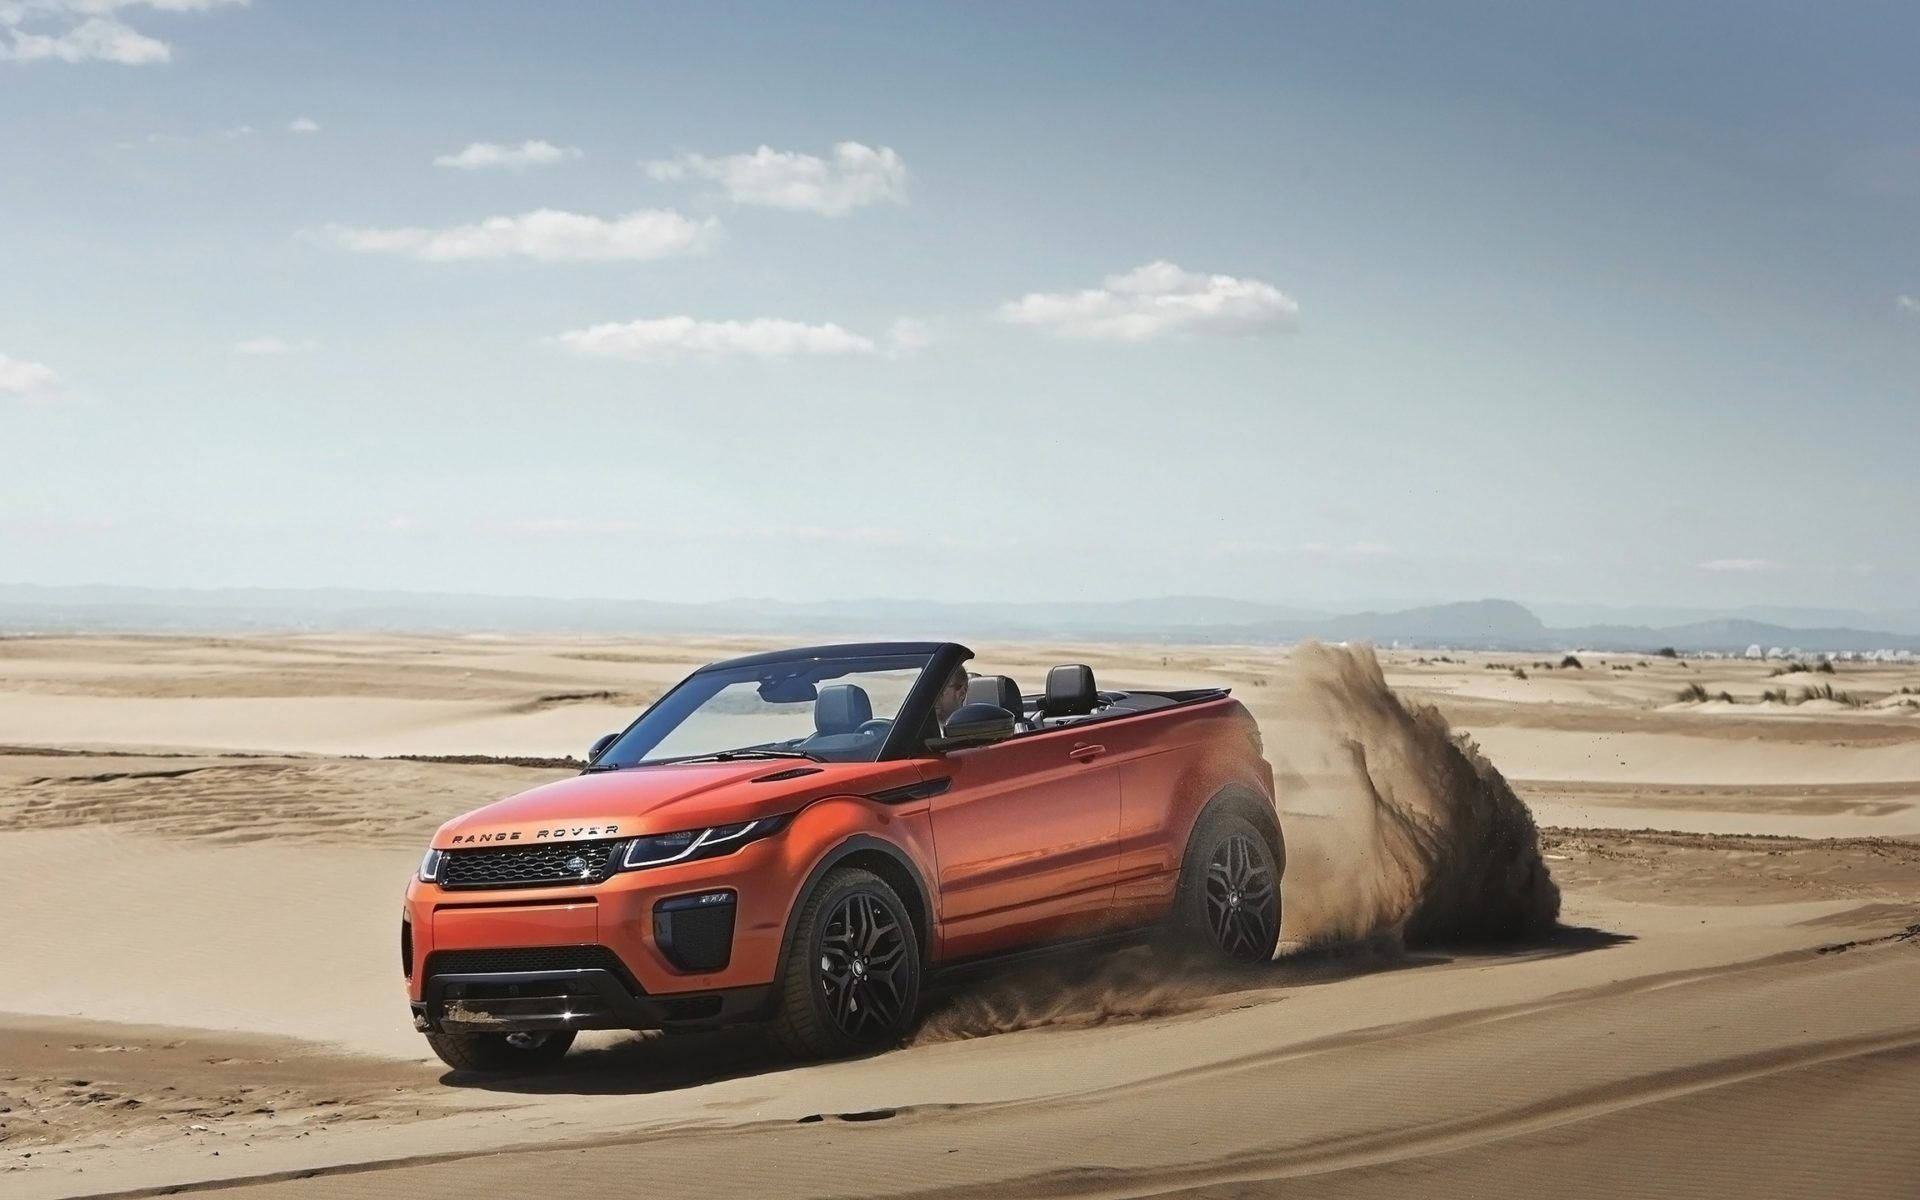 Take your next adventure in a luxurious Convertible Land Rover Wallpaper